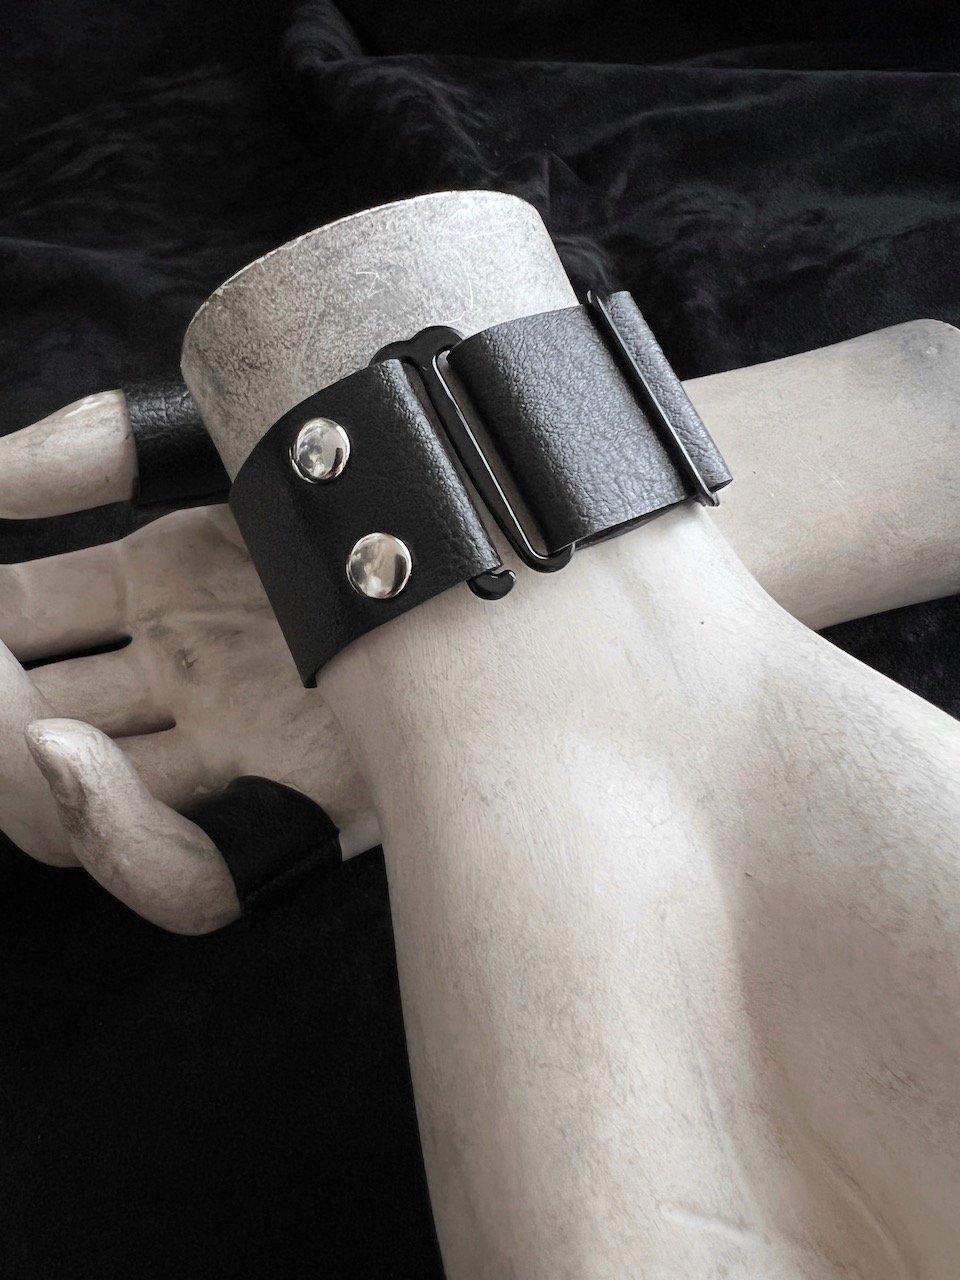 The Spiked Black Leather Cuff – The Dark USA